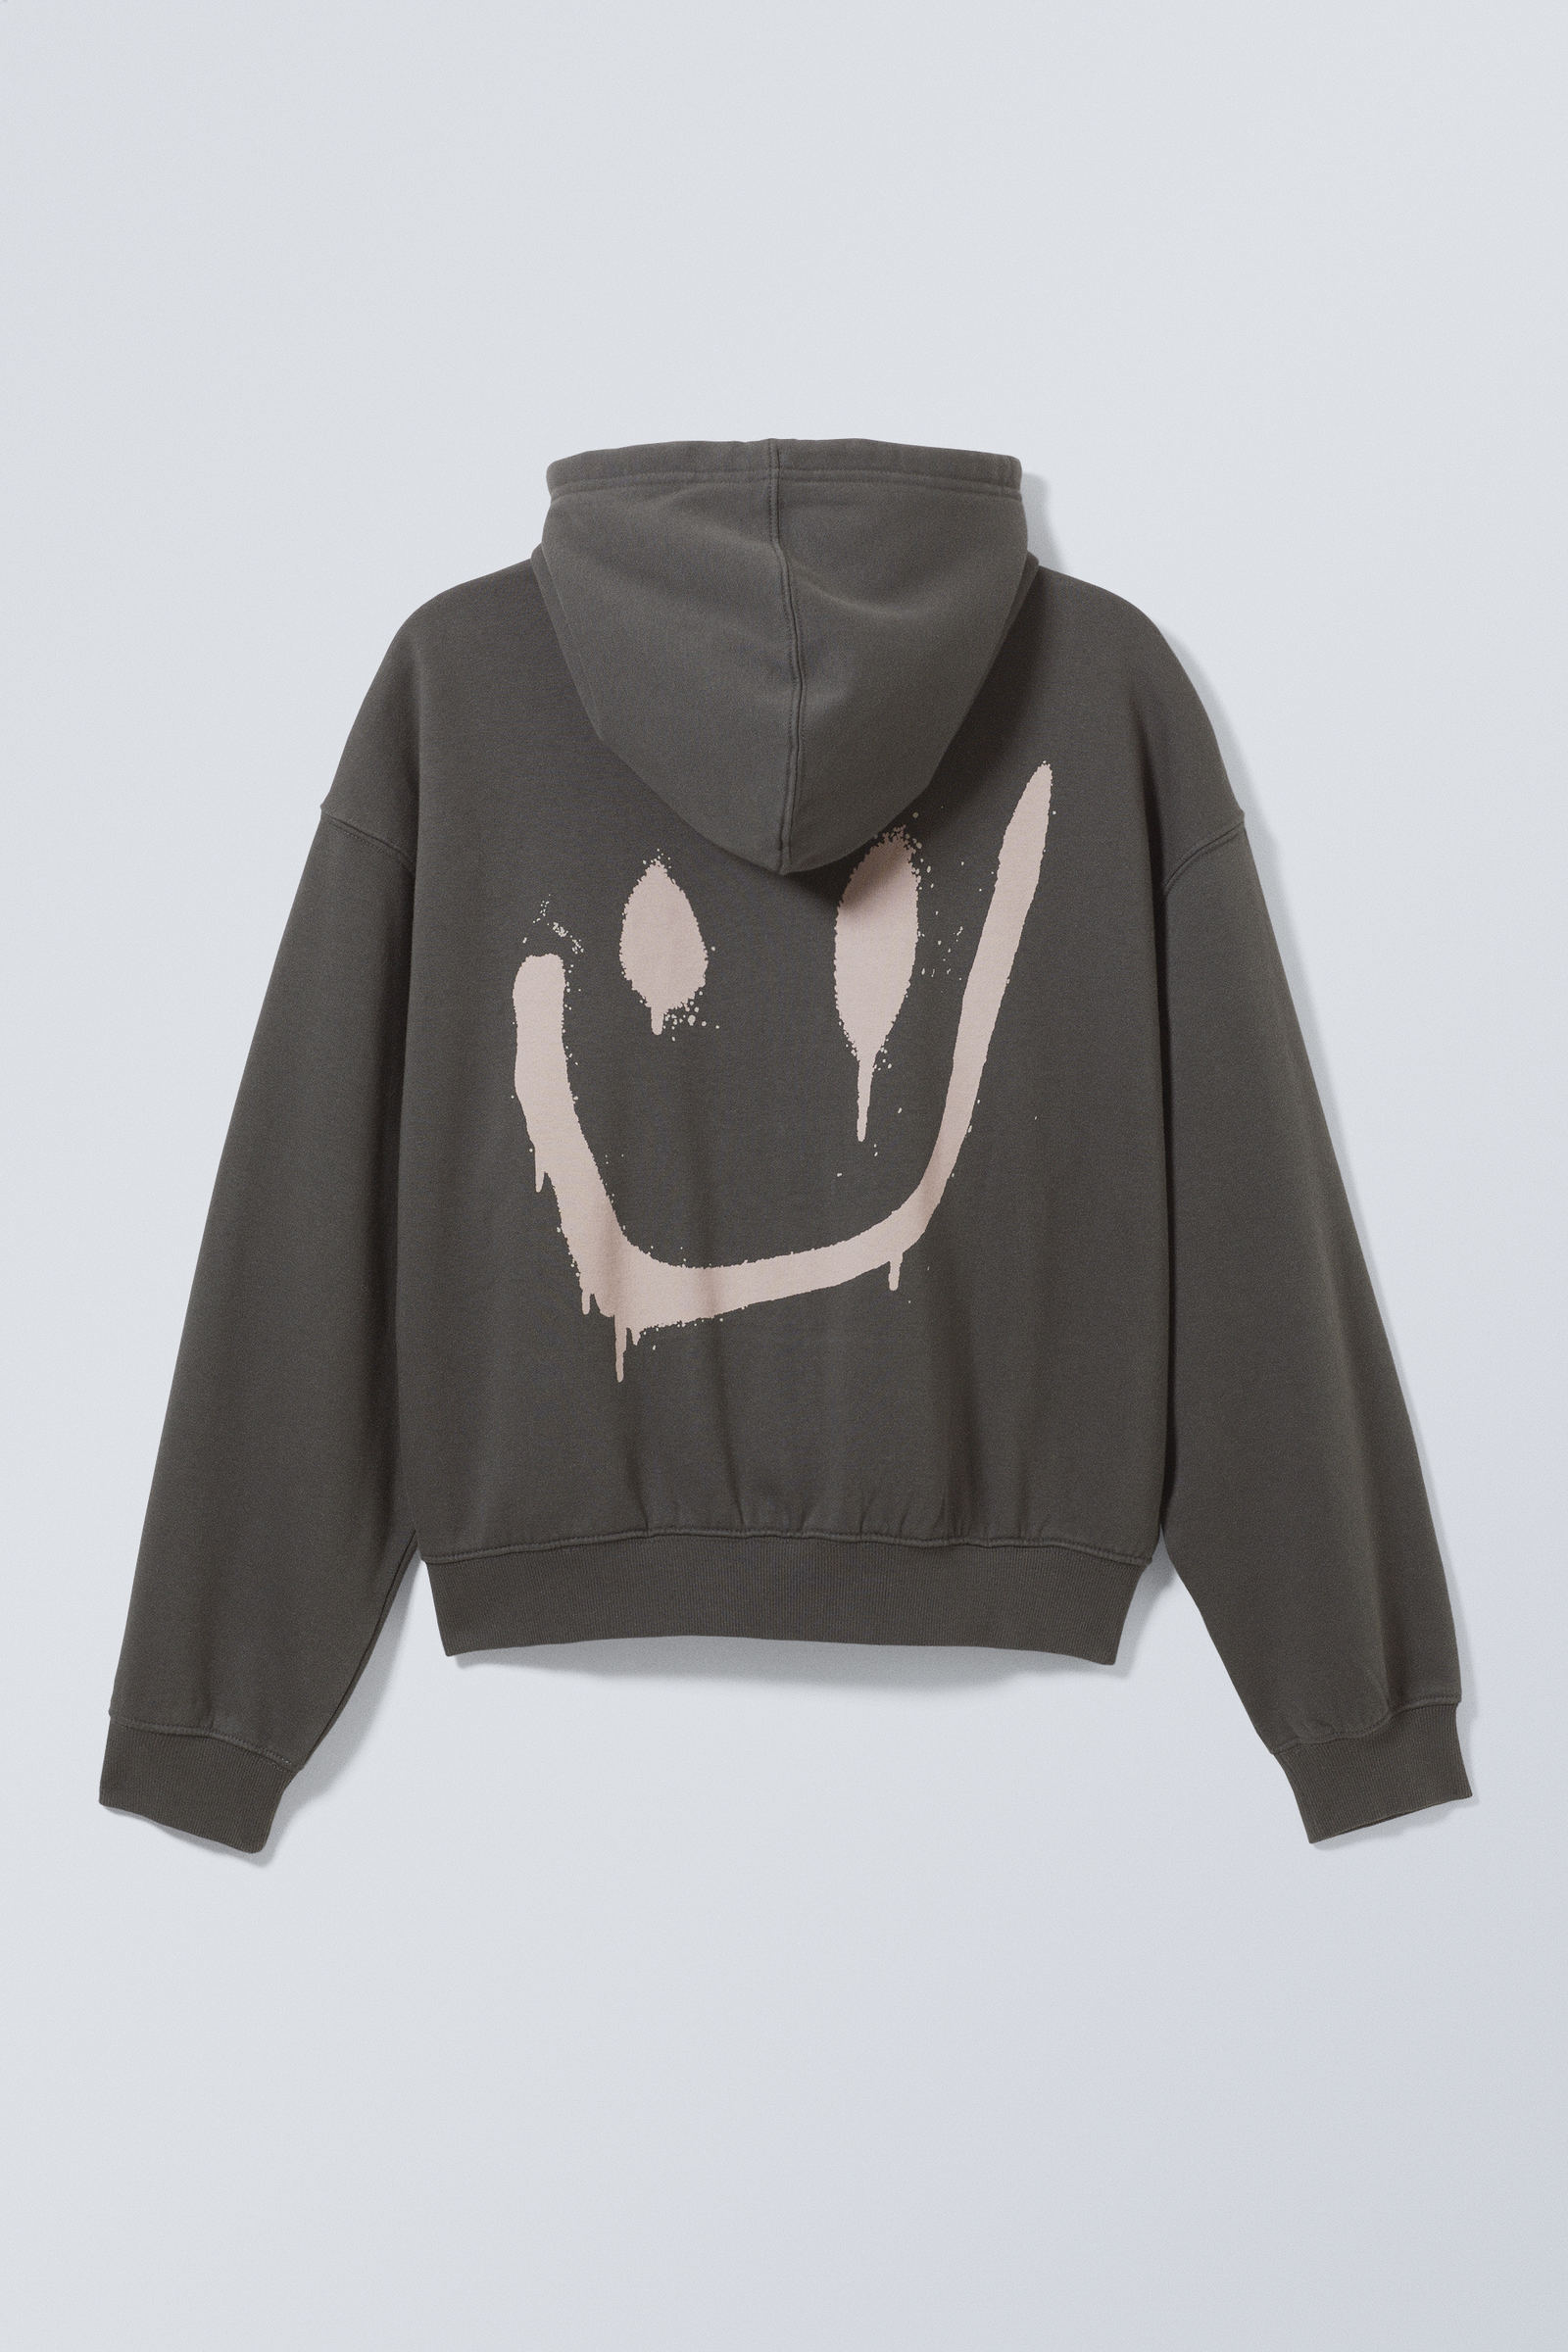 Drippy Smiling Face - Boxy Graphic Zip Hoodie - 4